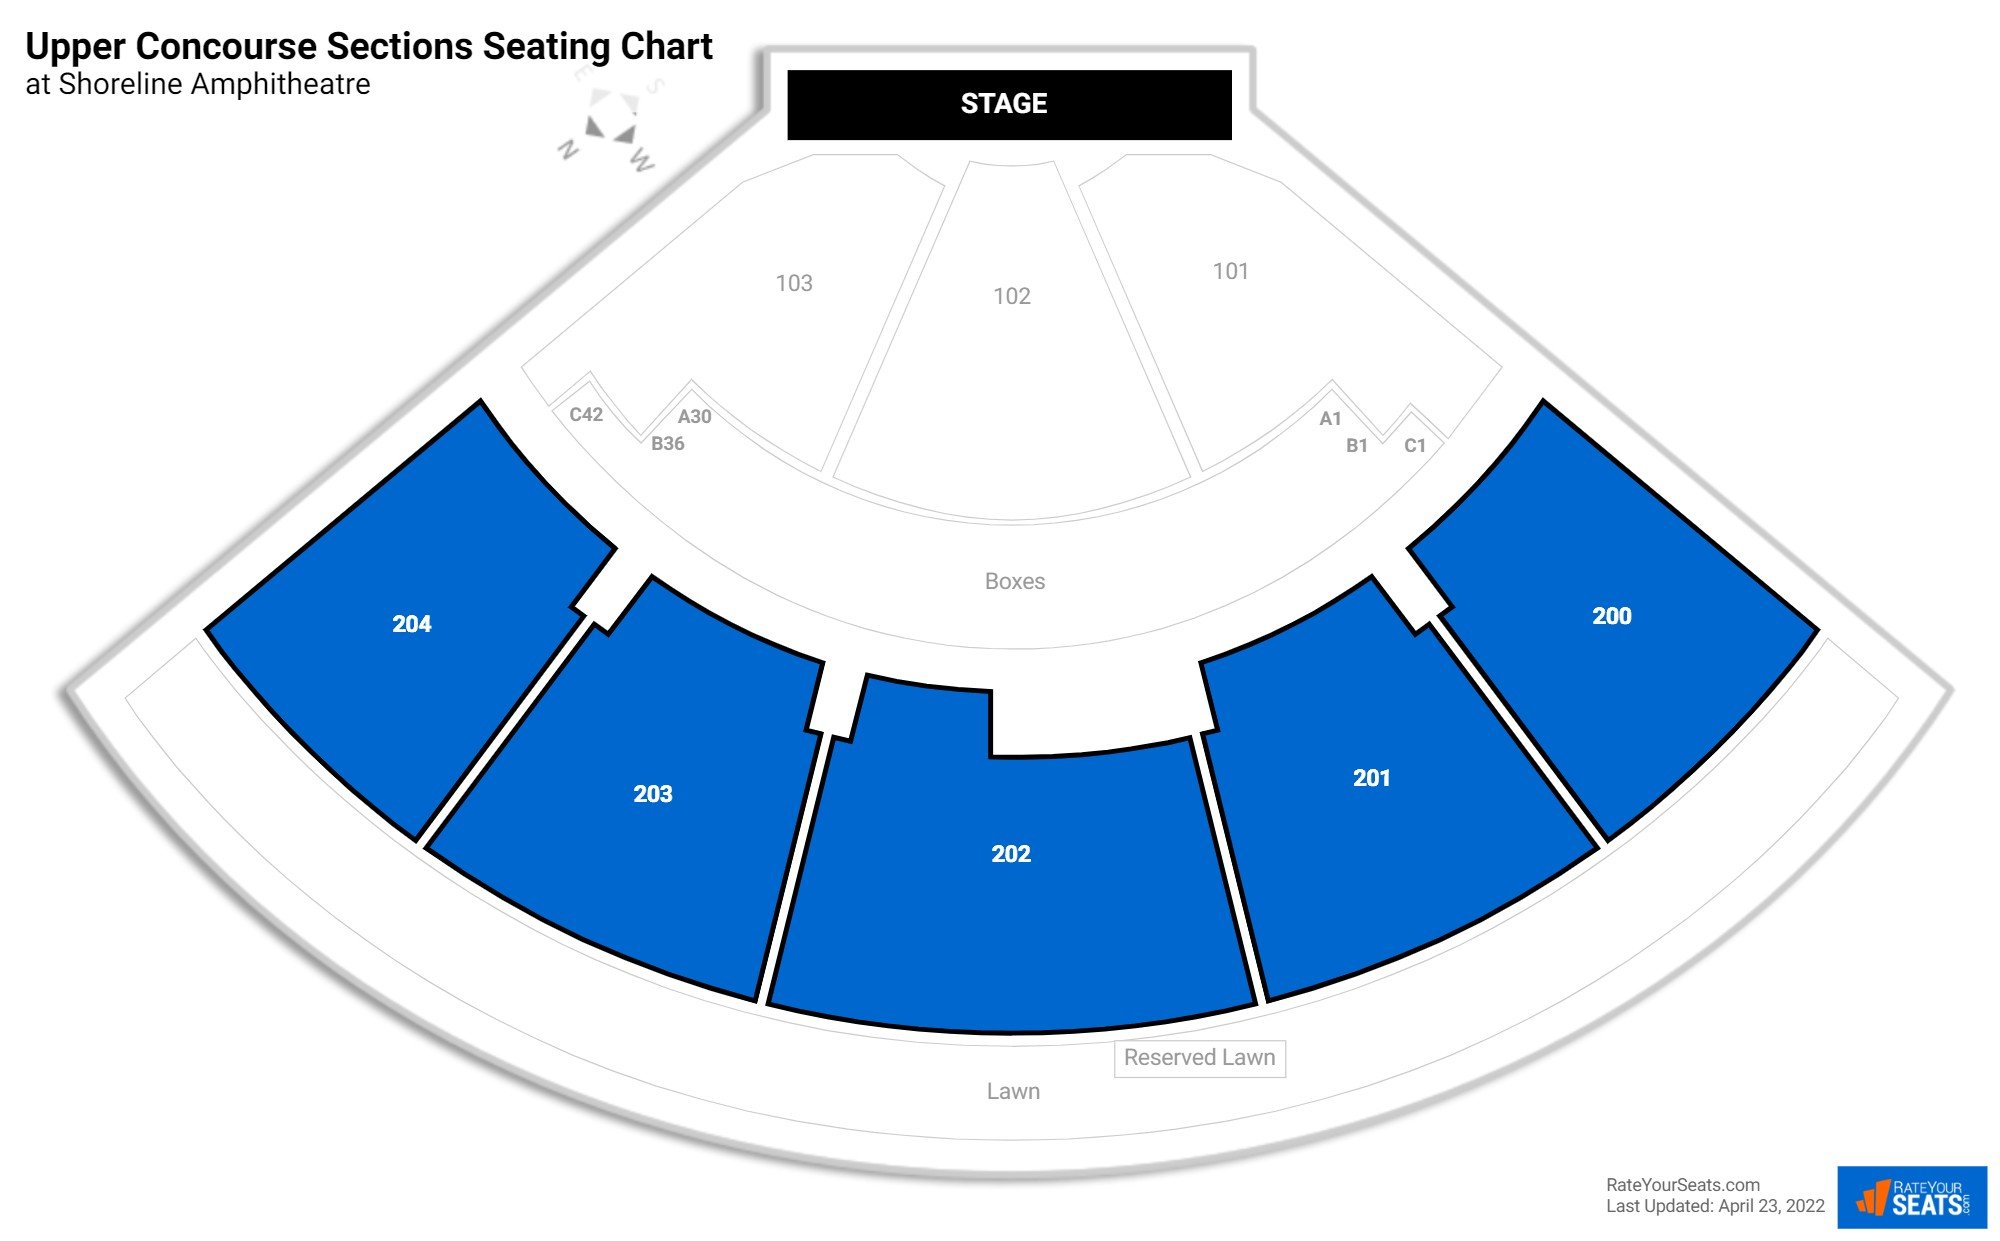 Concert Upper Concourse Sections Seating Chart at Shoreline Amphitheatre